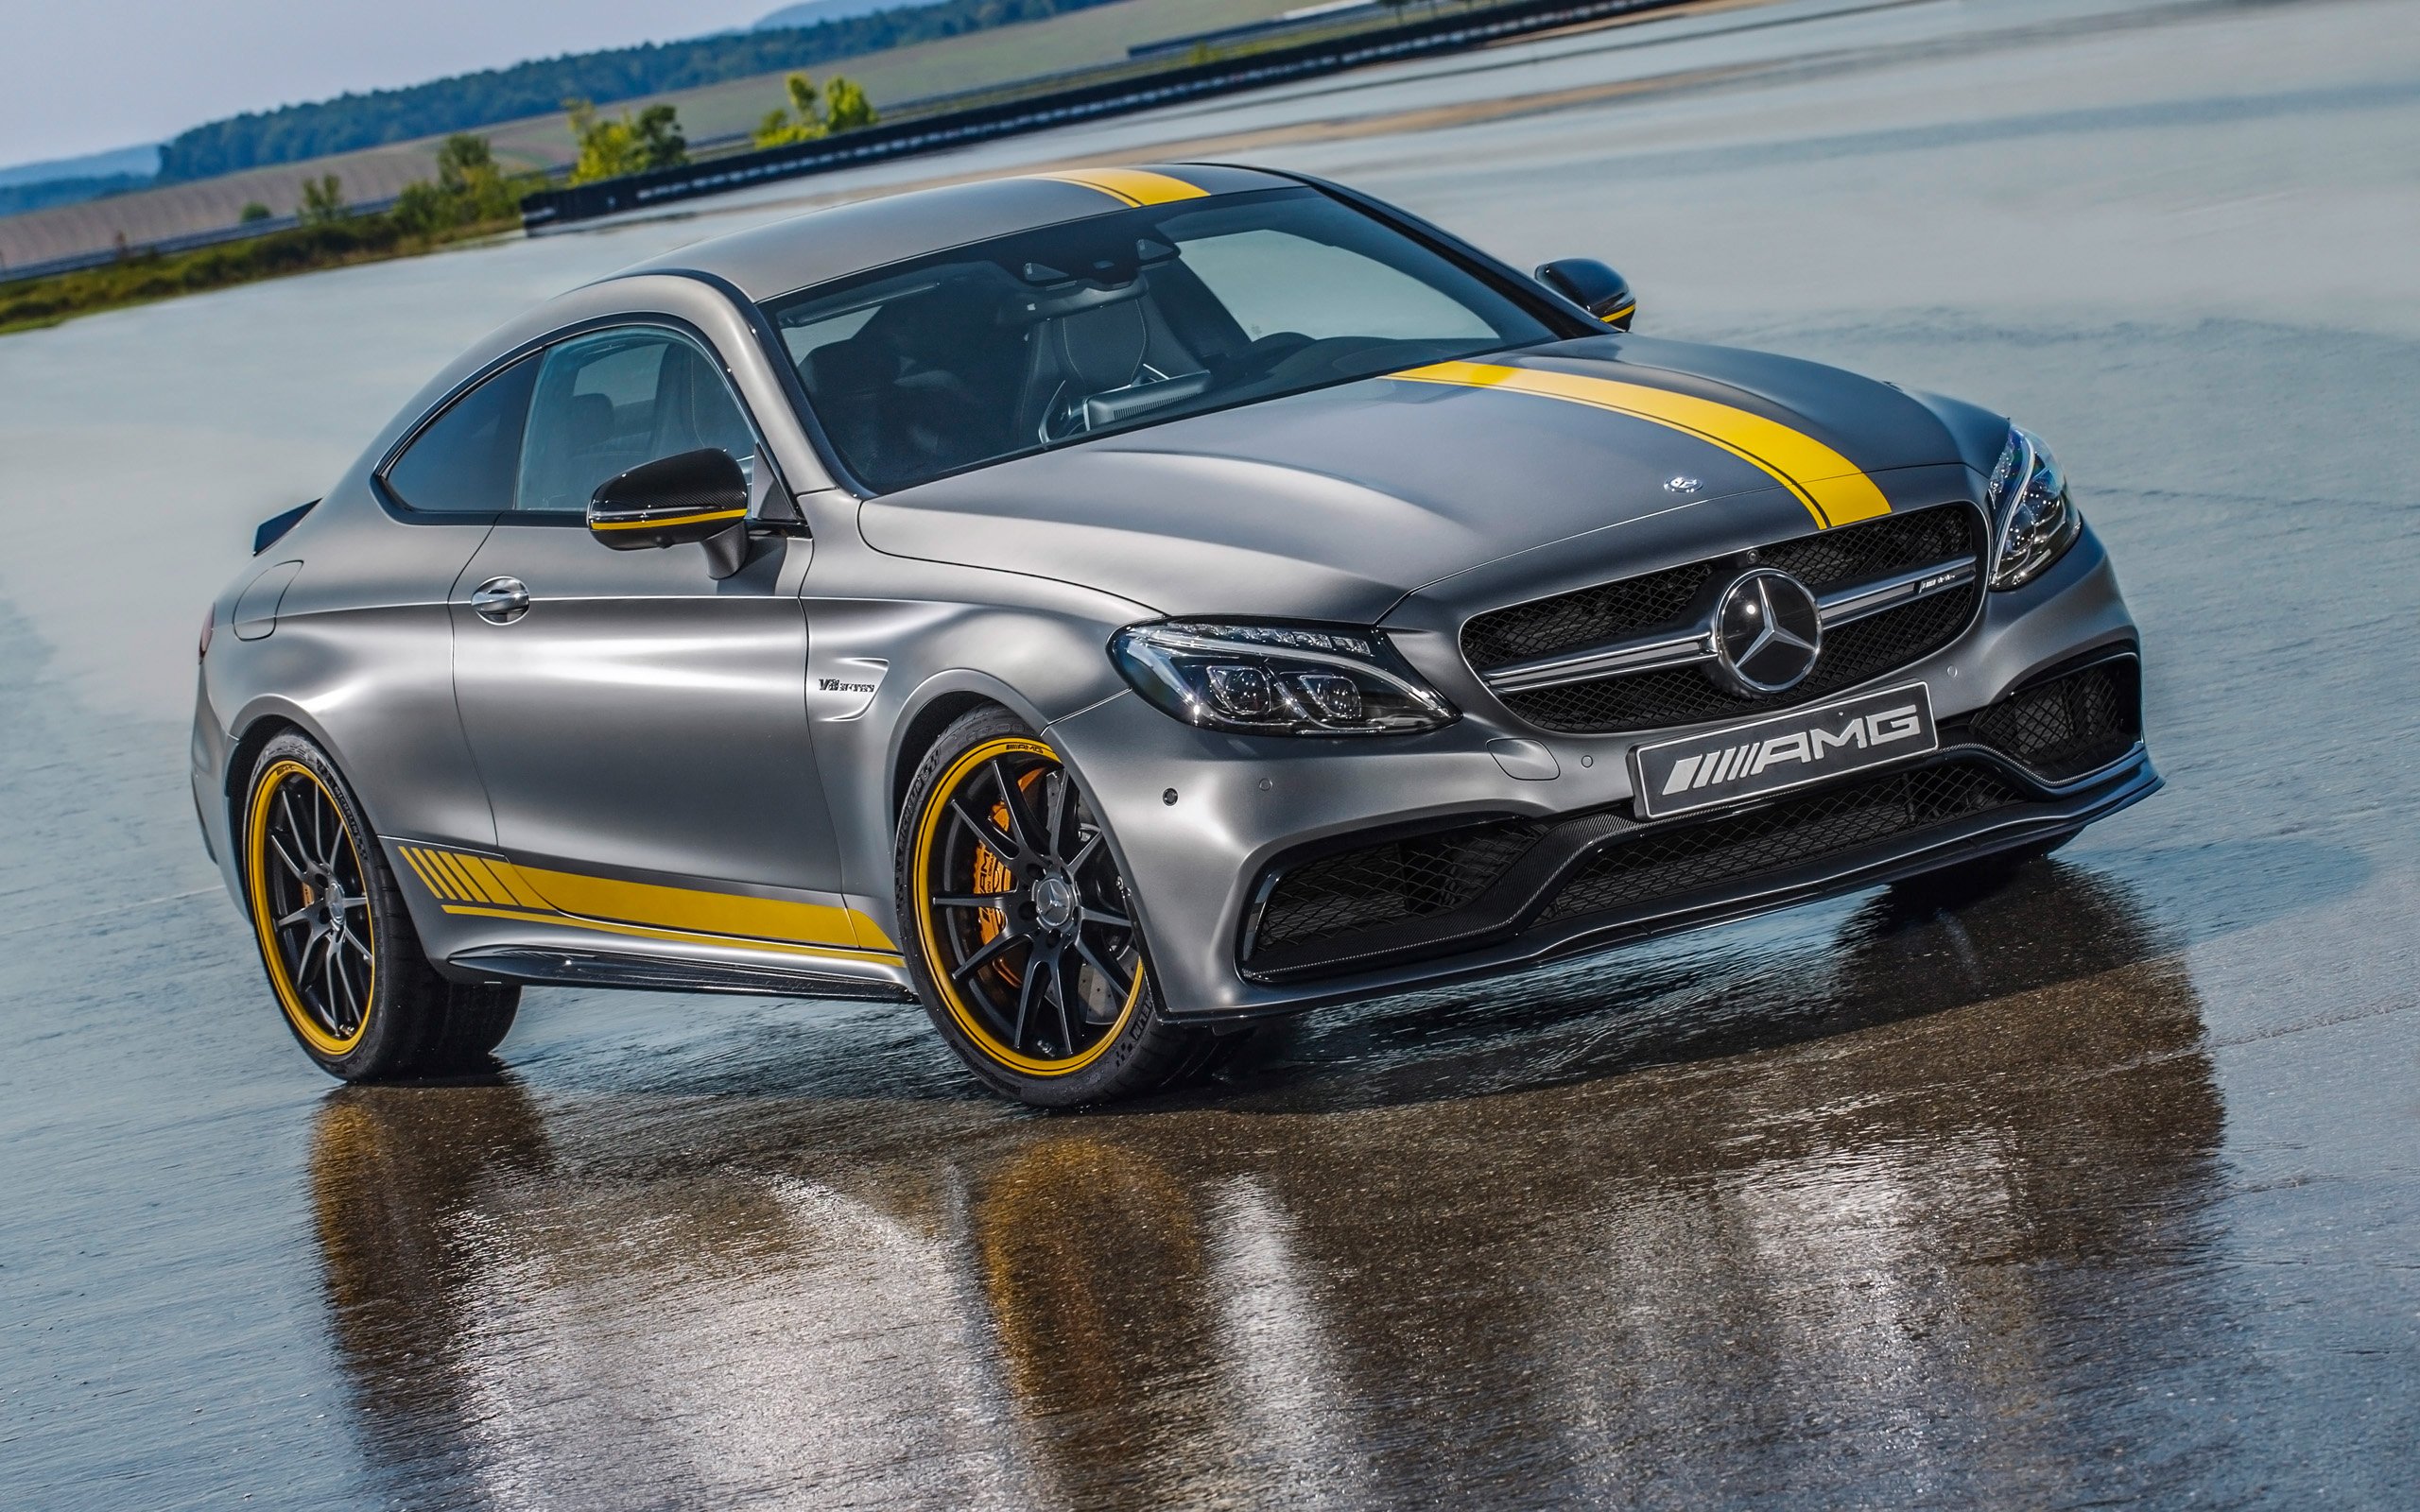 2016, Mercedes, Benz, Amg, C63, Coupe, Edition 1, Race, Racing Wallpaper